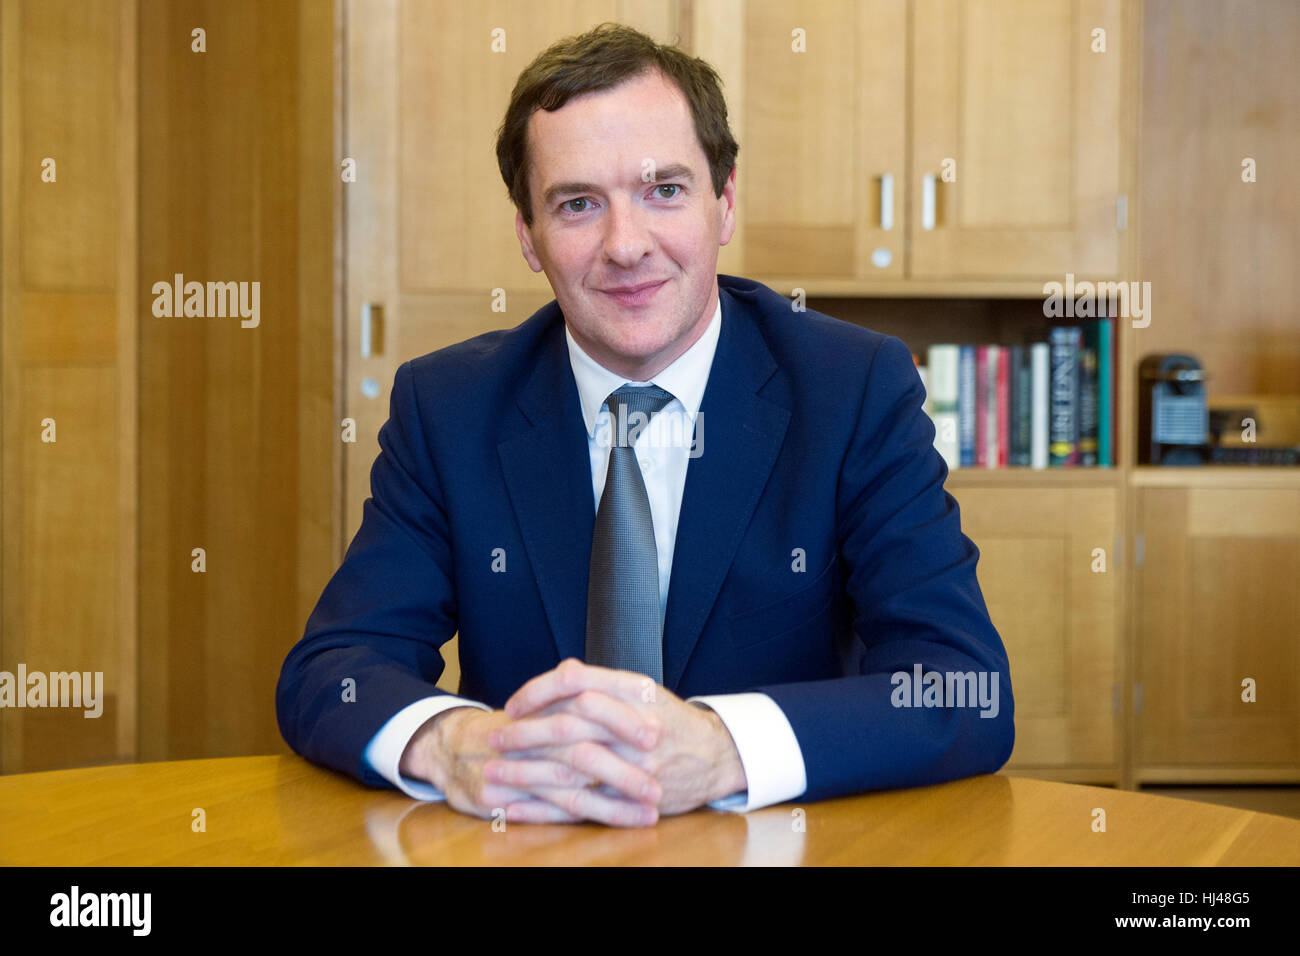 George Osborne, former Chancellor of the Exchequer and now economist for Blackrock Investments in his office. Stock Photo